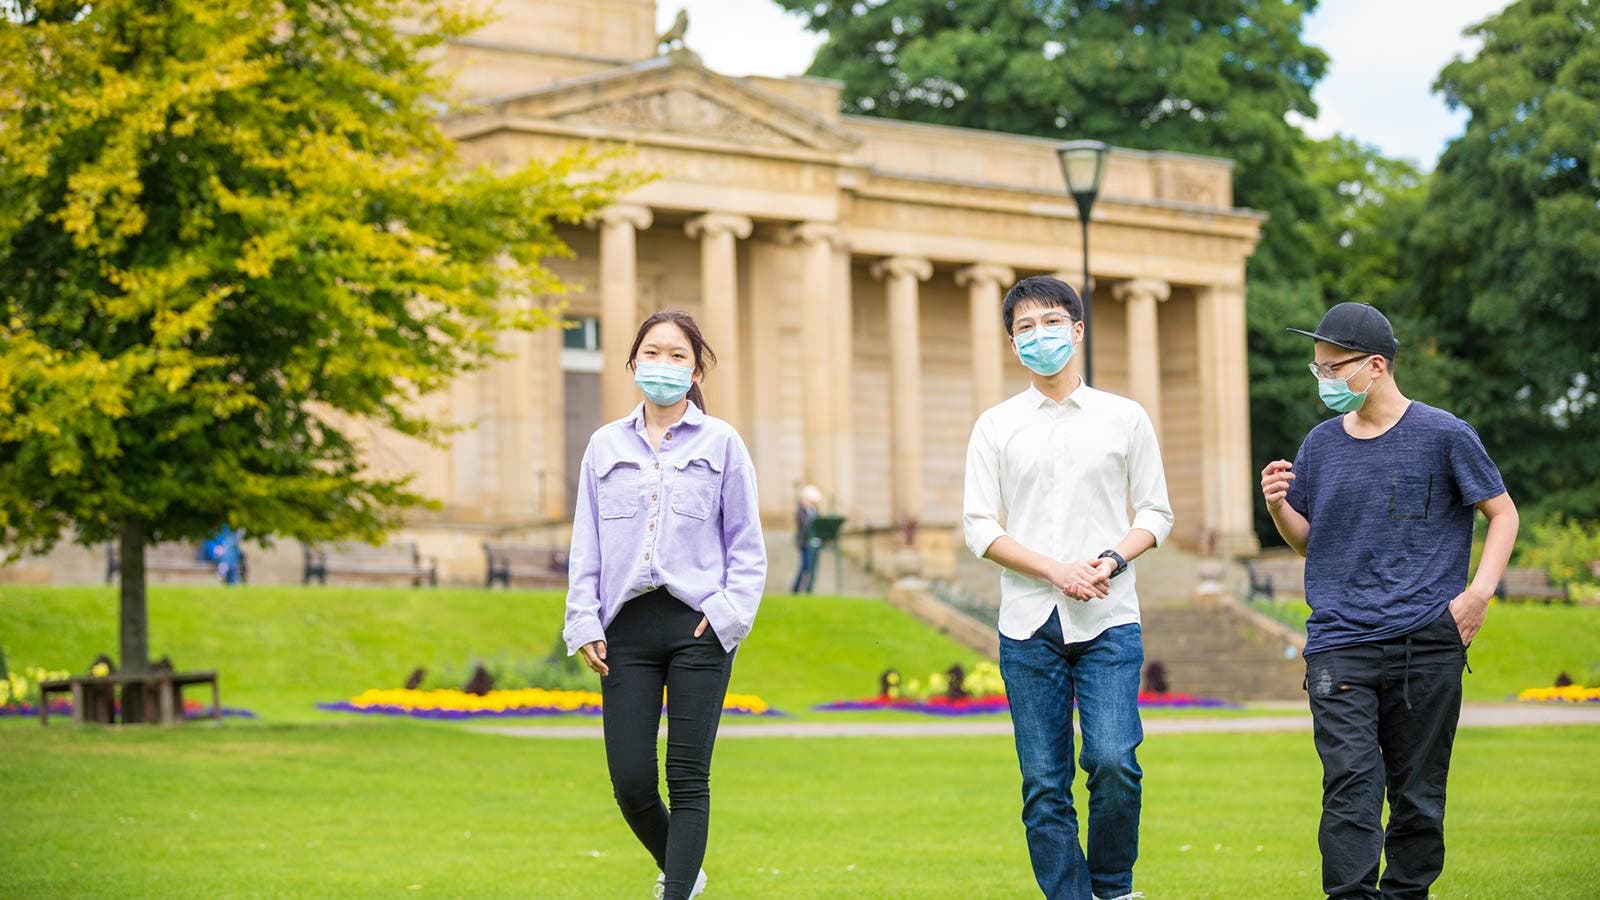 Students wearing face coverings walking across campus lawn